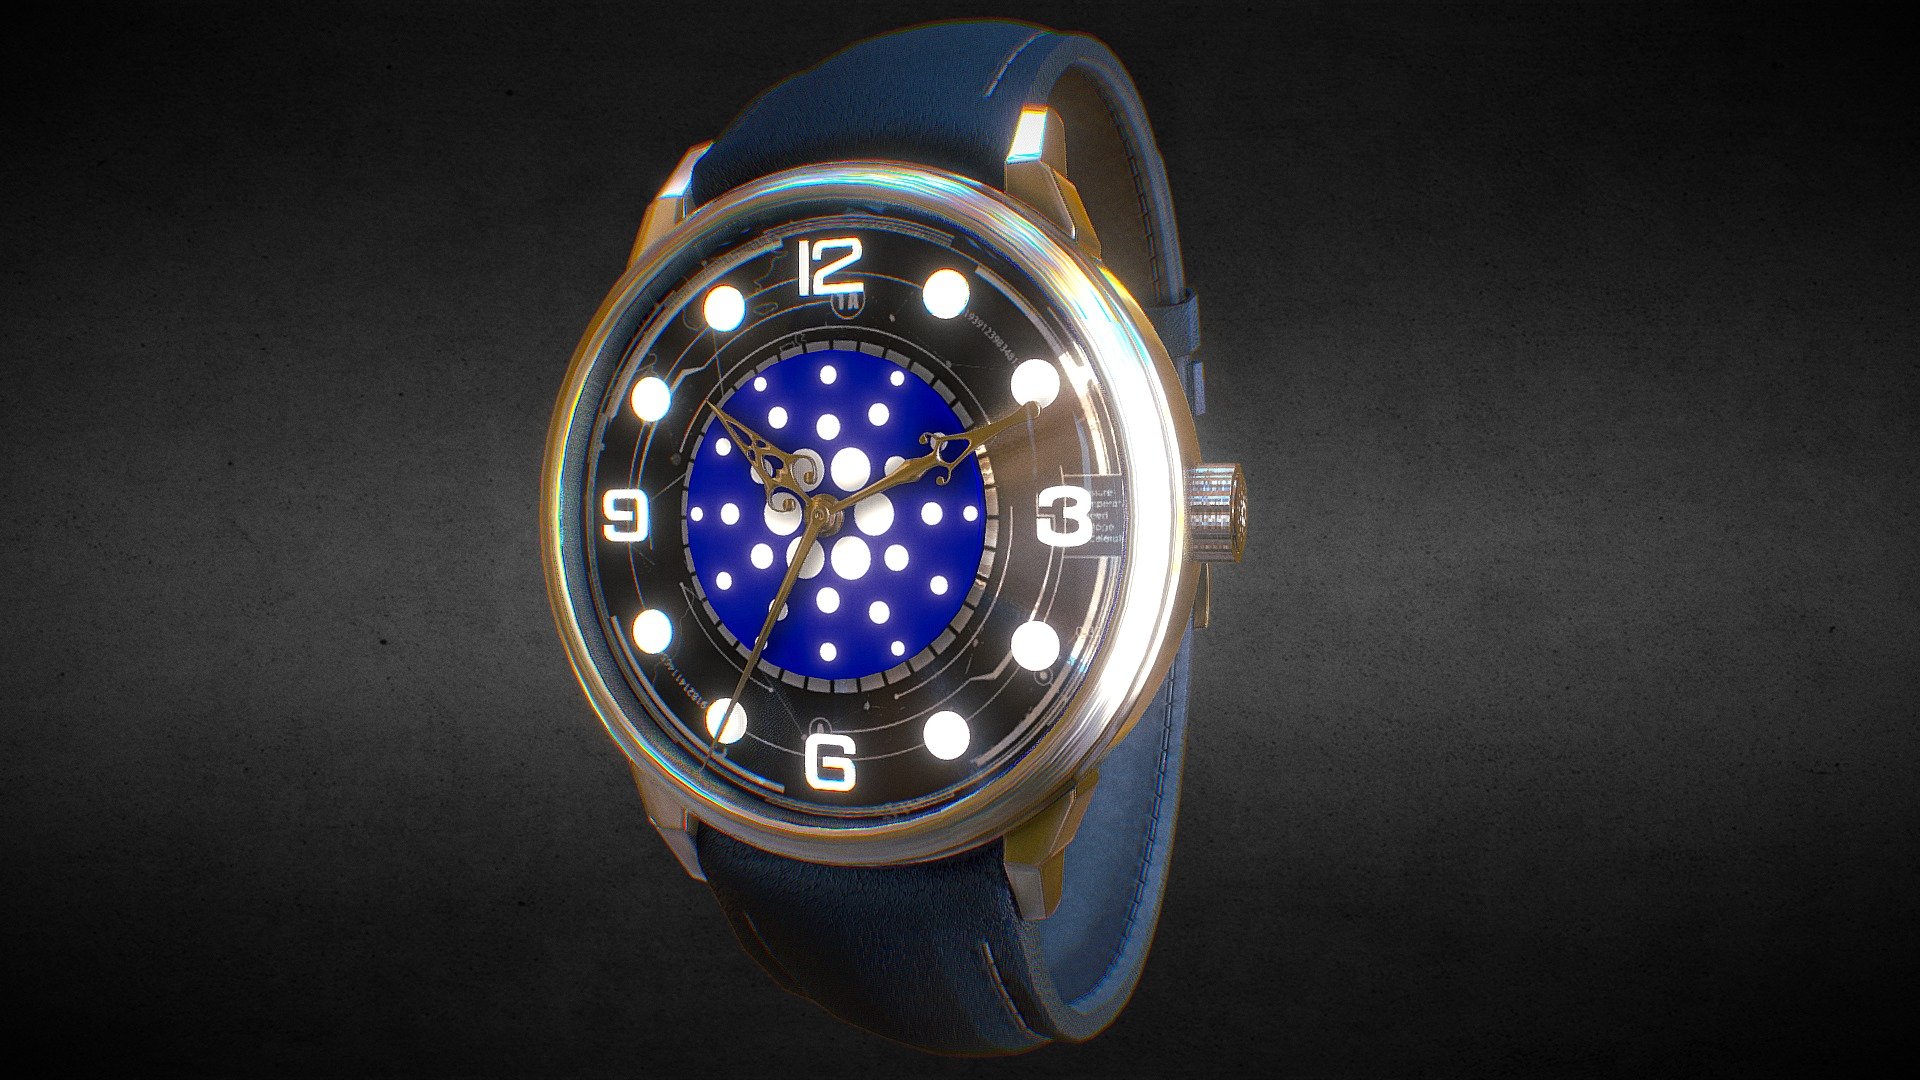 Awesome stainless steel Bitcoin watch.

Currently available for download in FBX format.

3D model developed by AR-Watches 3d model